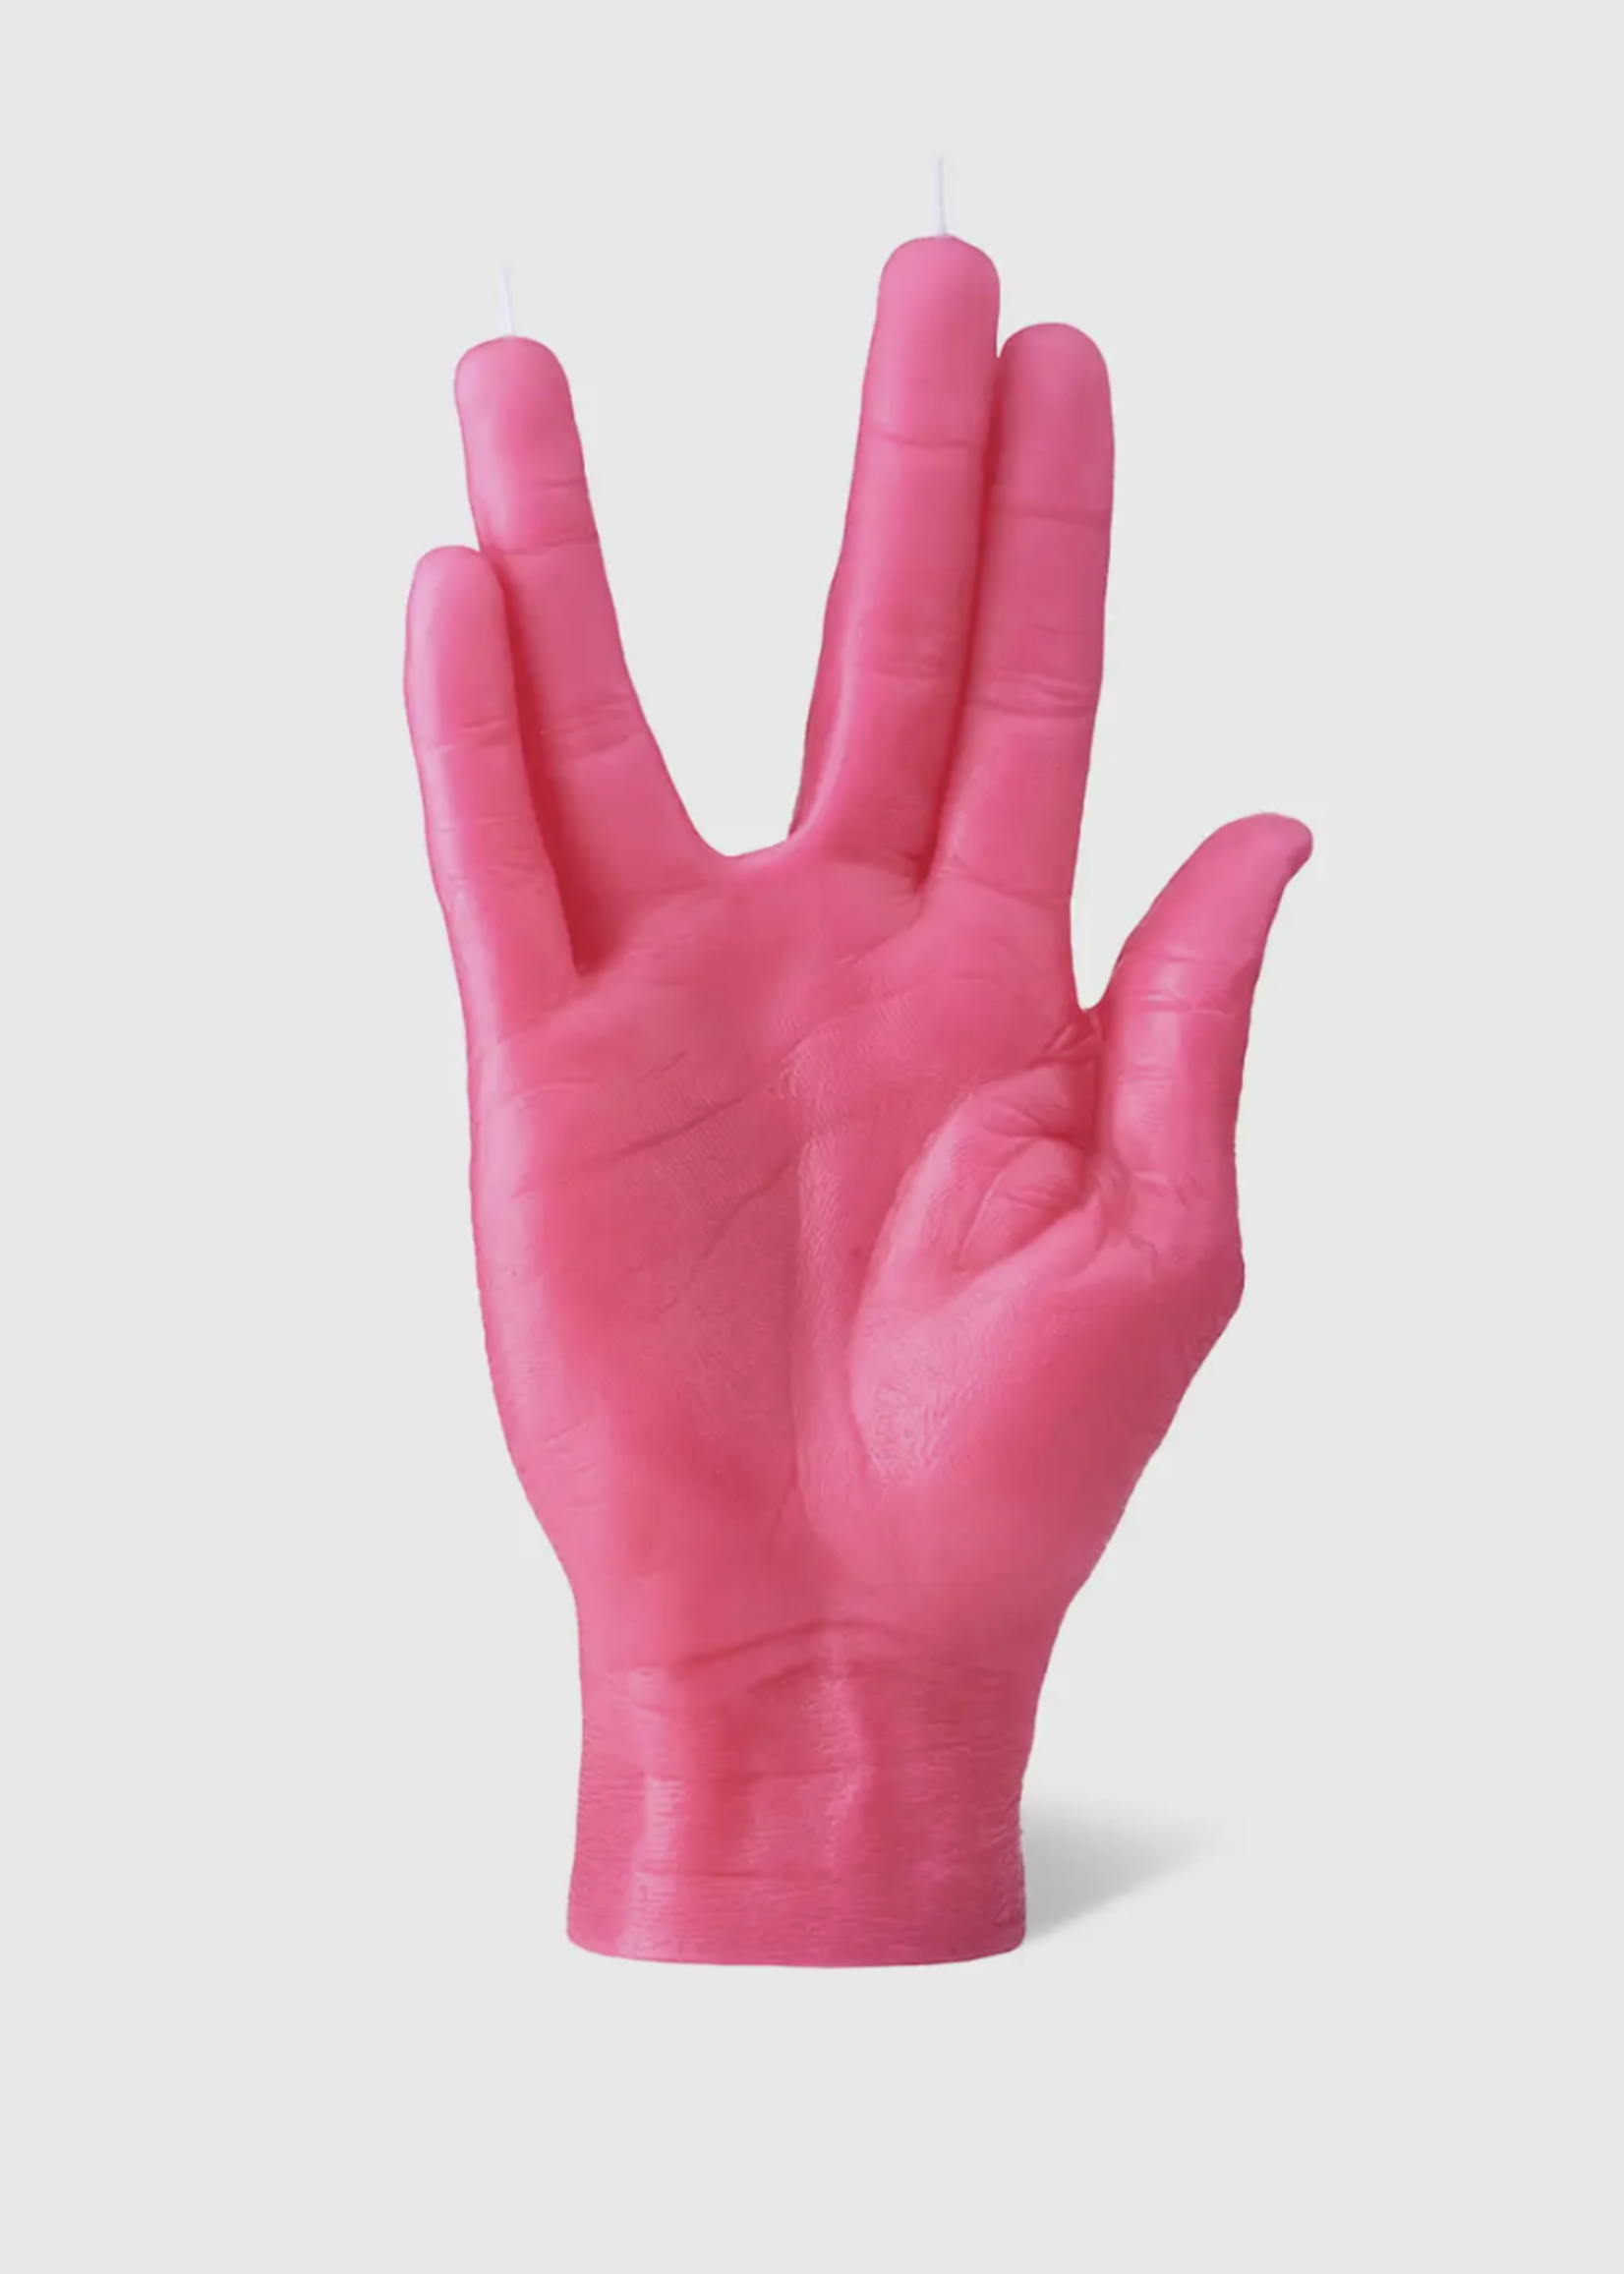 Creative Twist Events CandleHand Gesture Candle "LLAP"  Pink